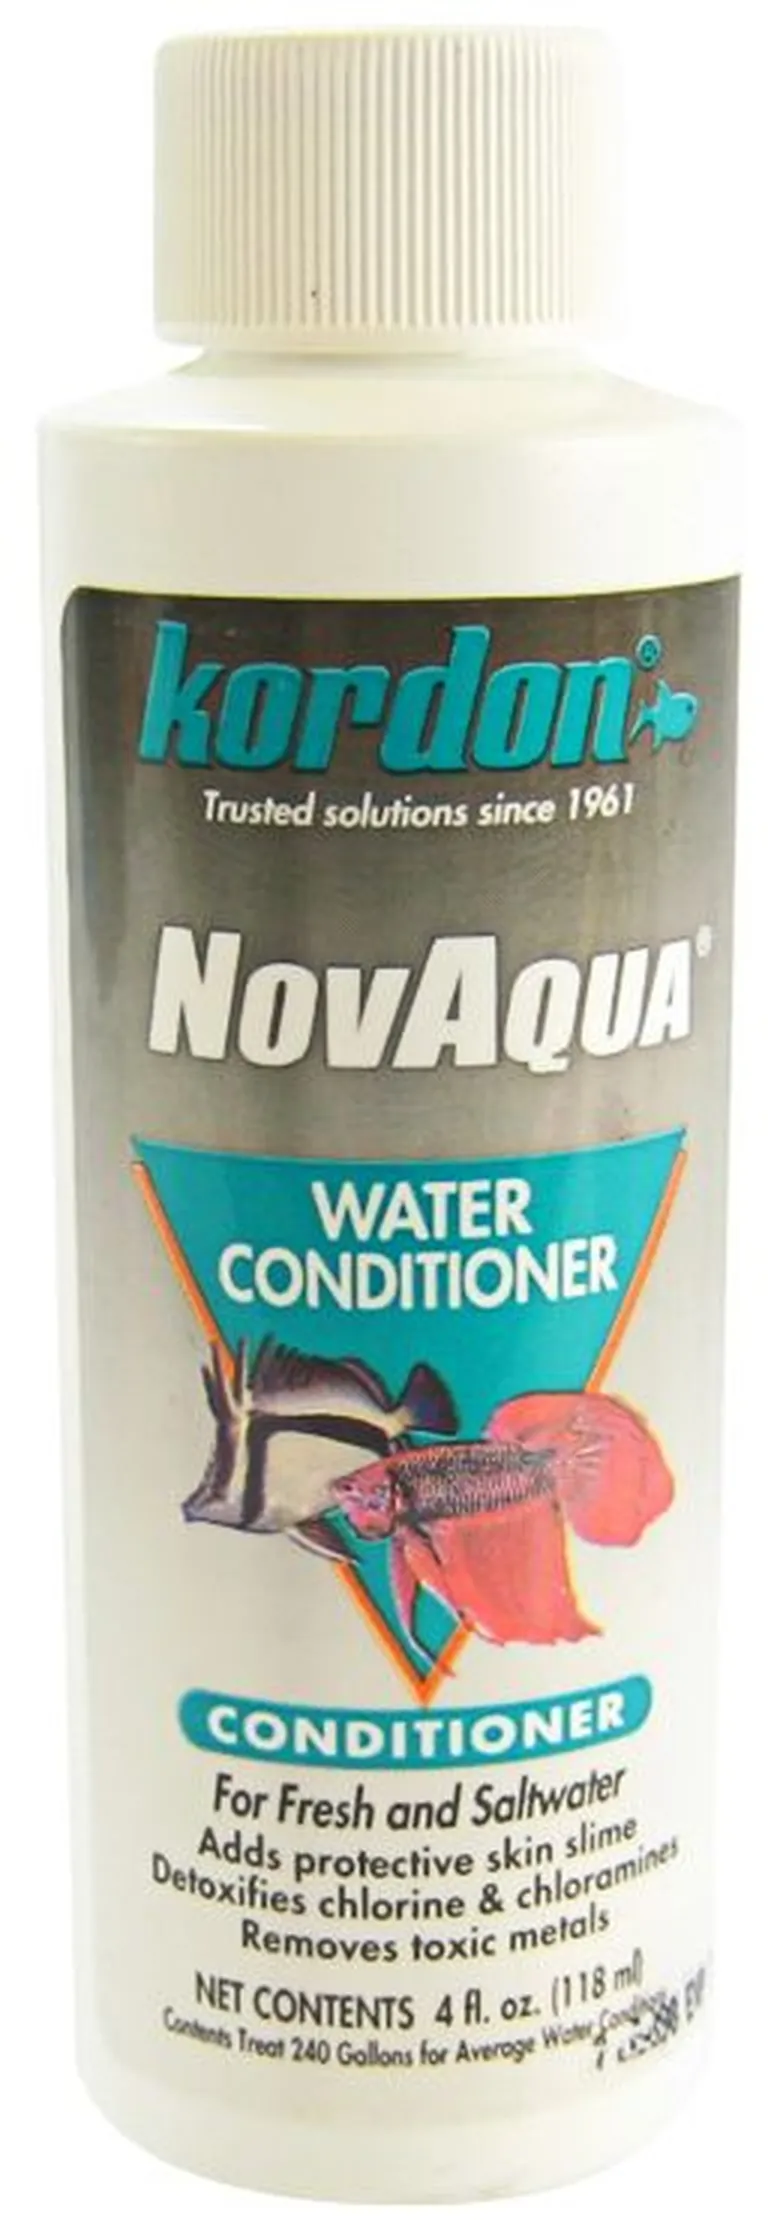 Kordon NovAqua Water Conditioner for Freshwater and Saltwater Aquariums Photo 2